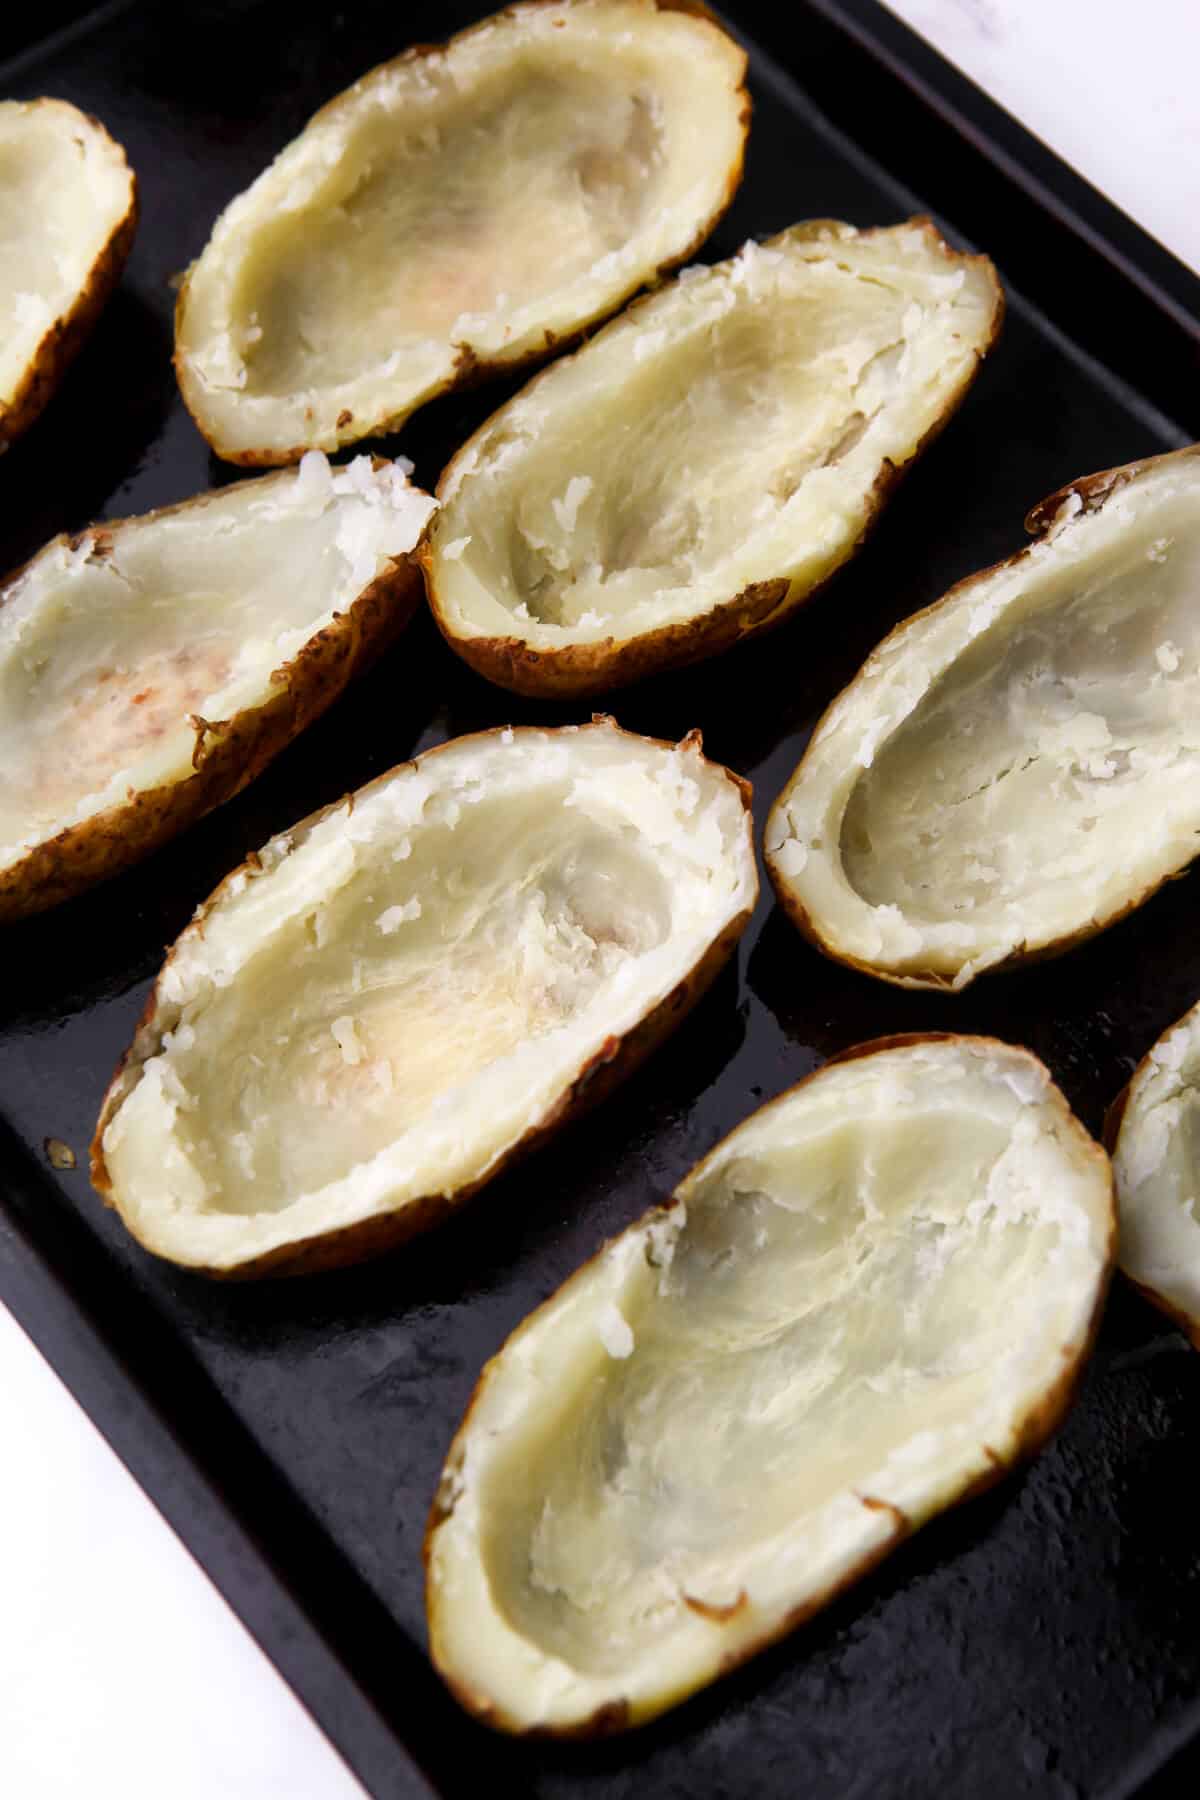 Baked potatoes with the centers scooped out on a baking sheet.